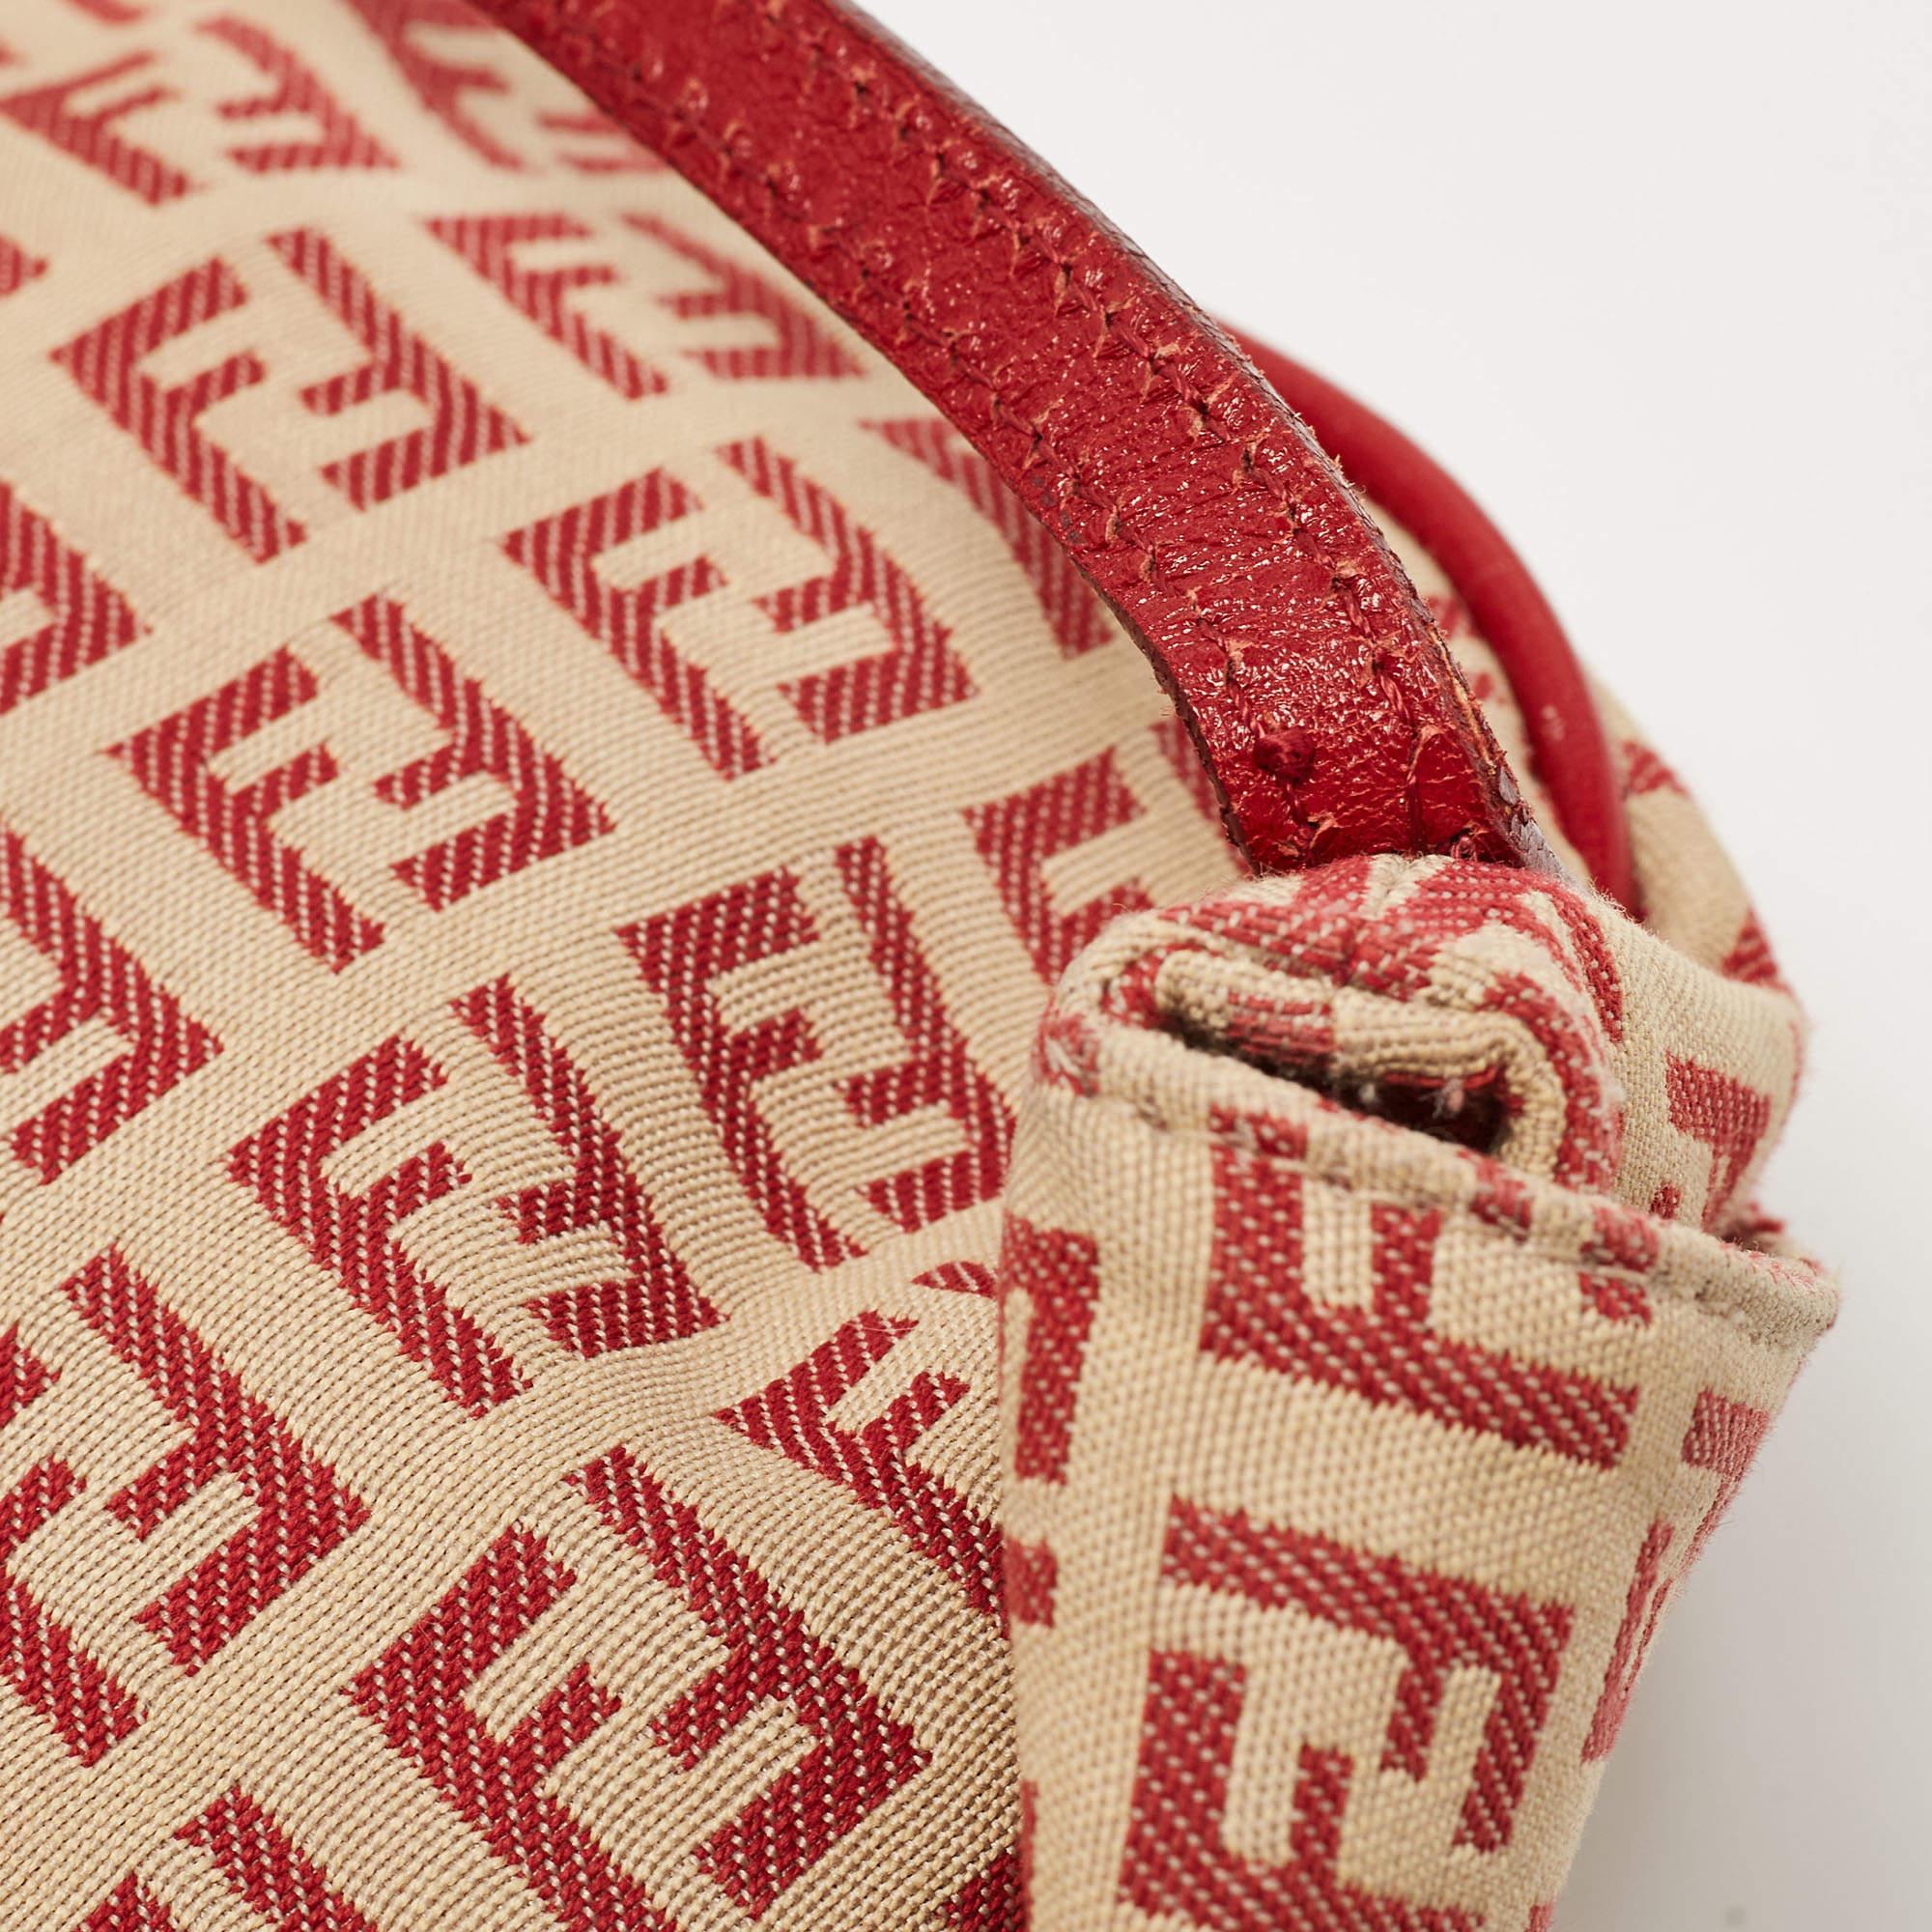 Fendi Red/Beige Zucchino Fabric and Leather Flap Messenger Bag For Sale 14